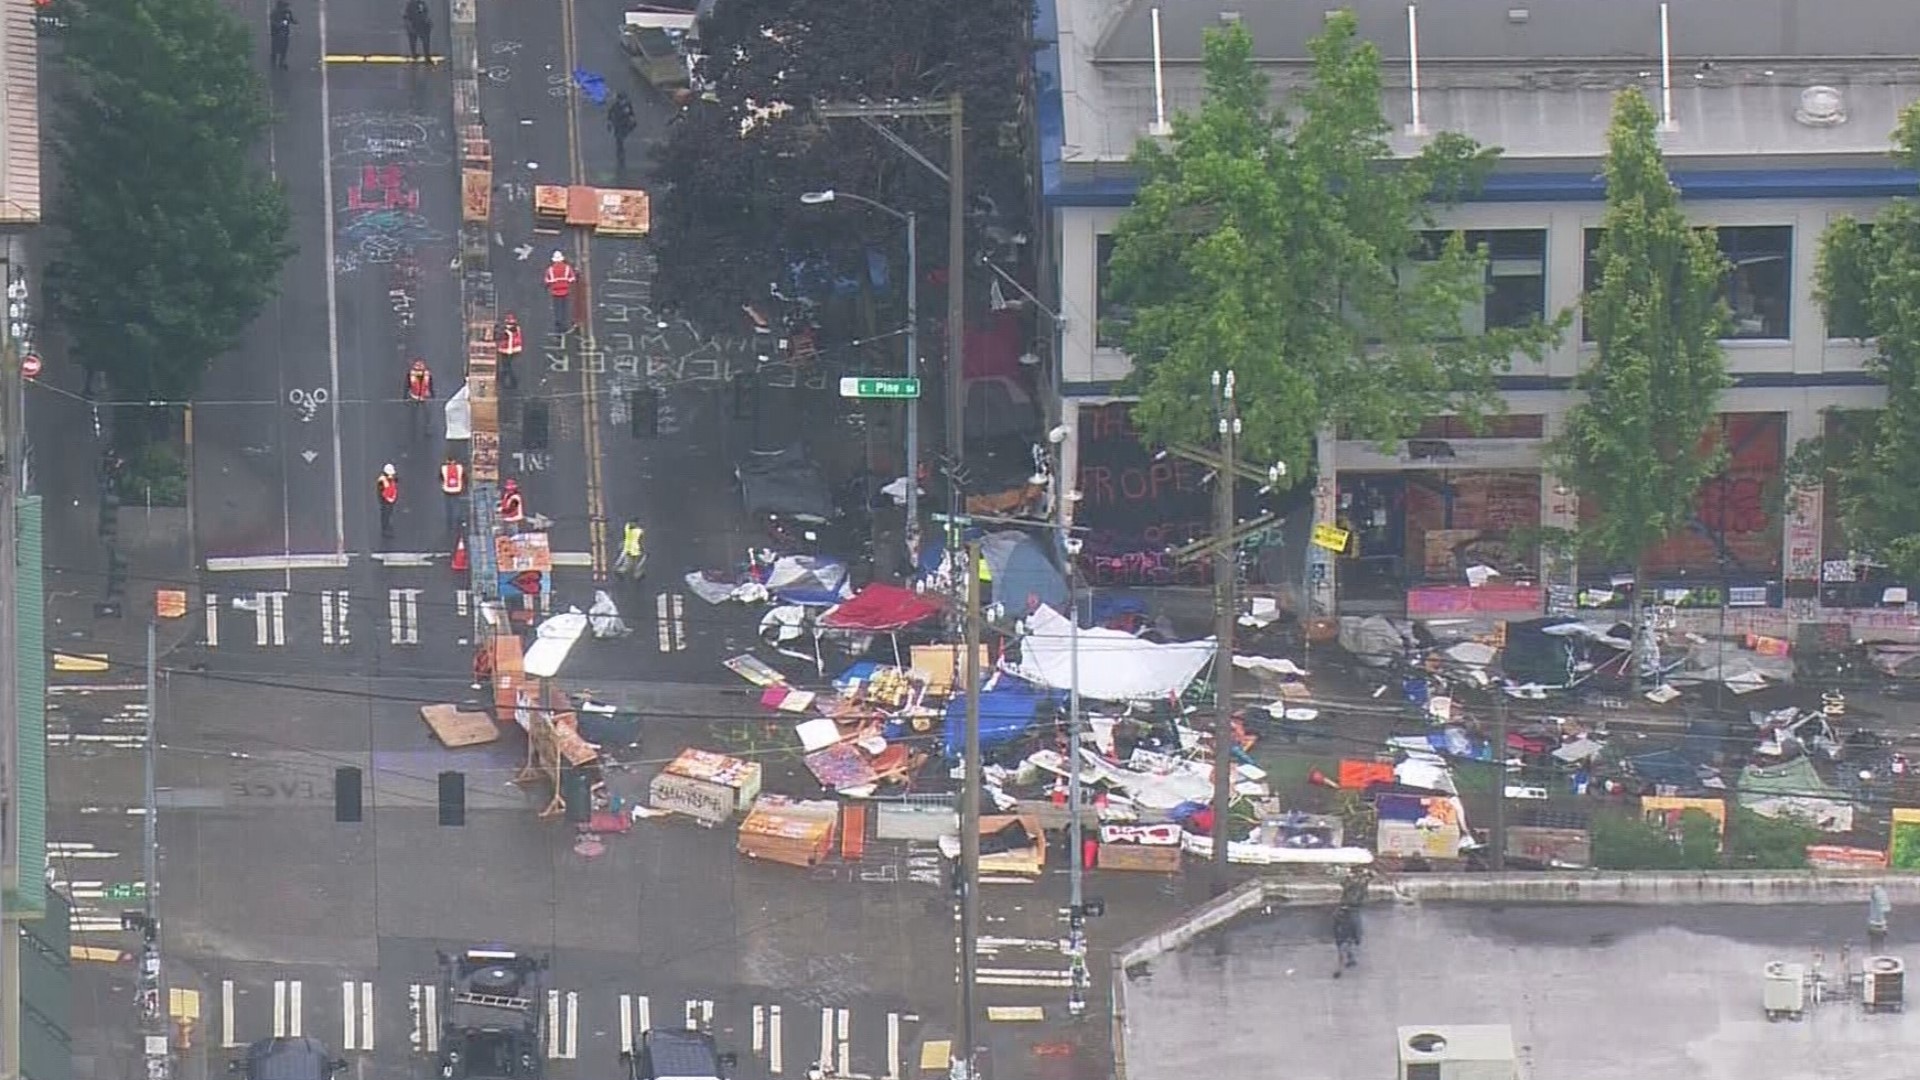 Take in a bird's-eye view of the CHOP protest zone after police cleared out demonstrators on July 1, 2020.